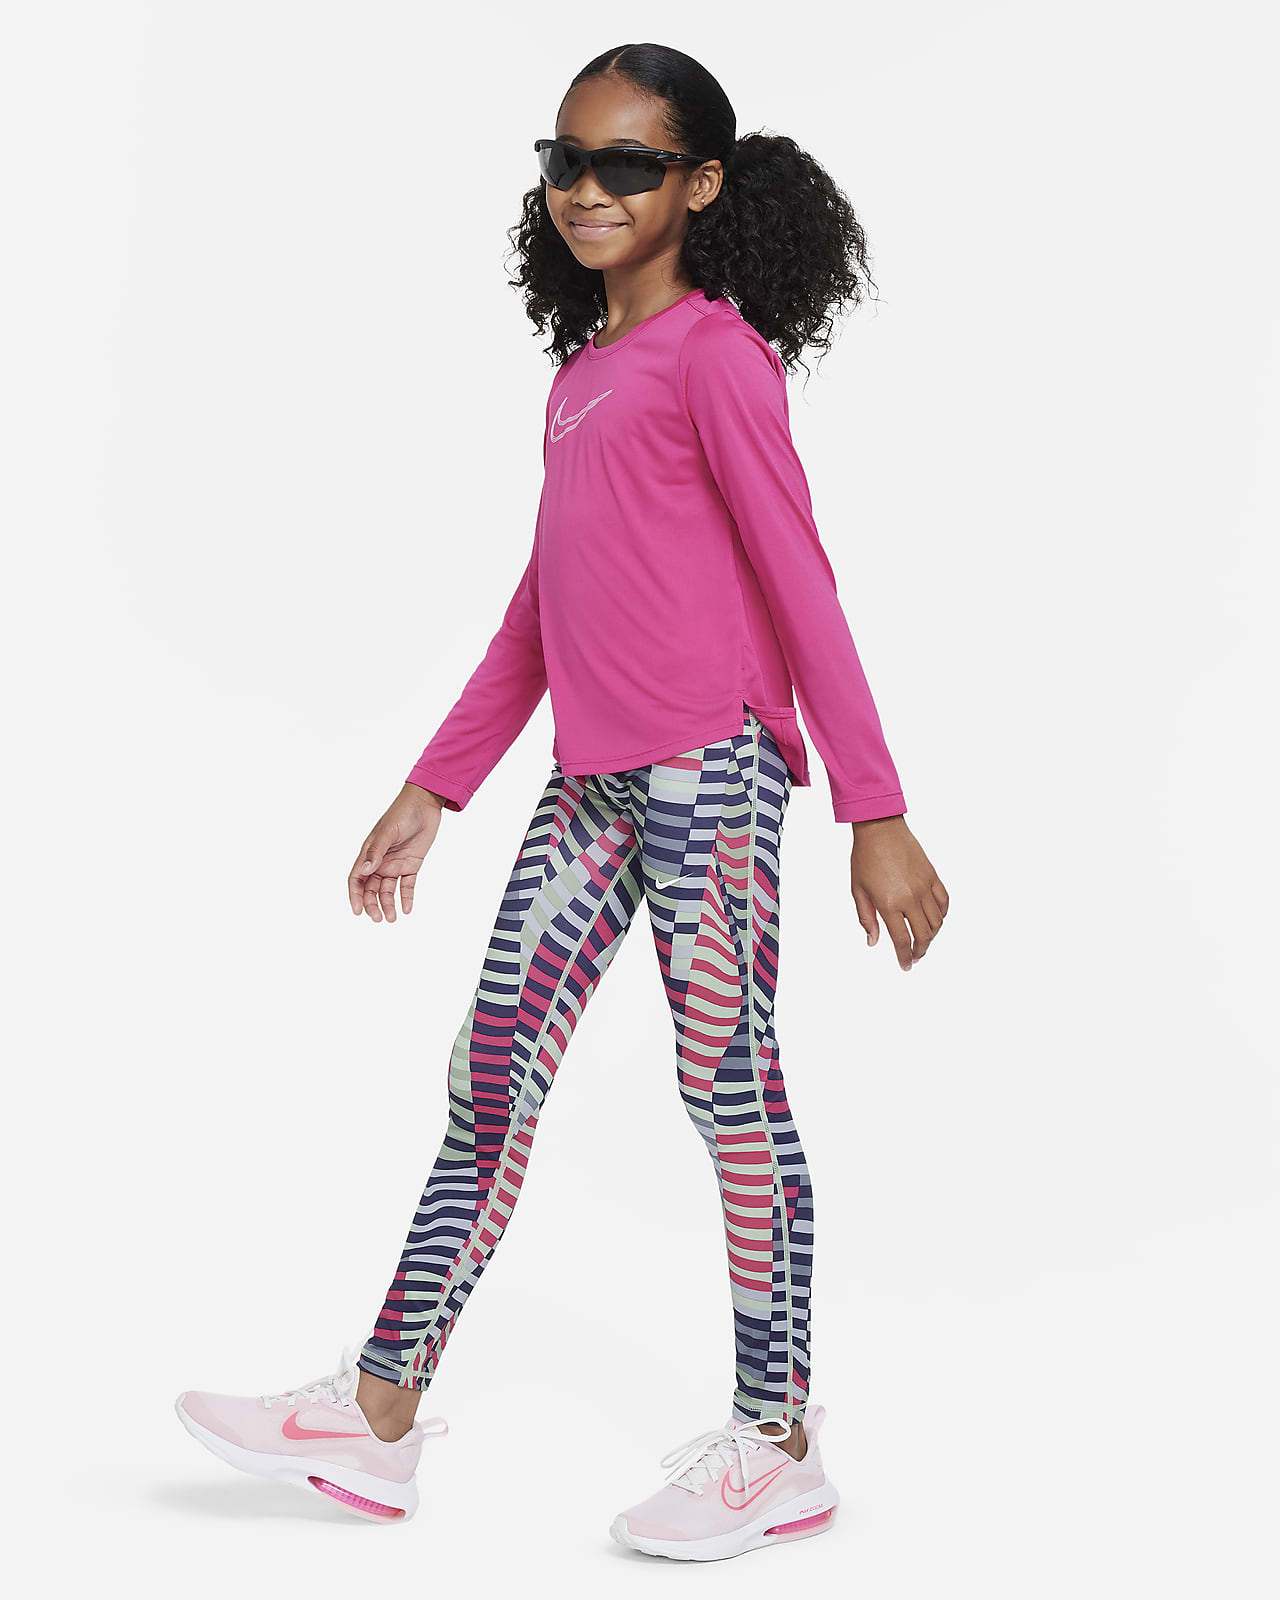 Nike Kids Graphic Leggings - Soft and Lightweight